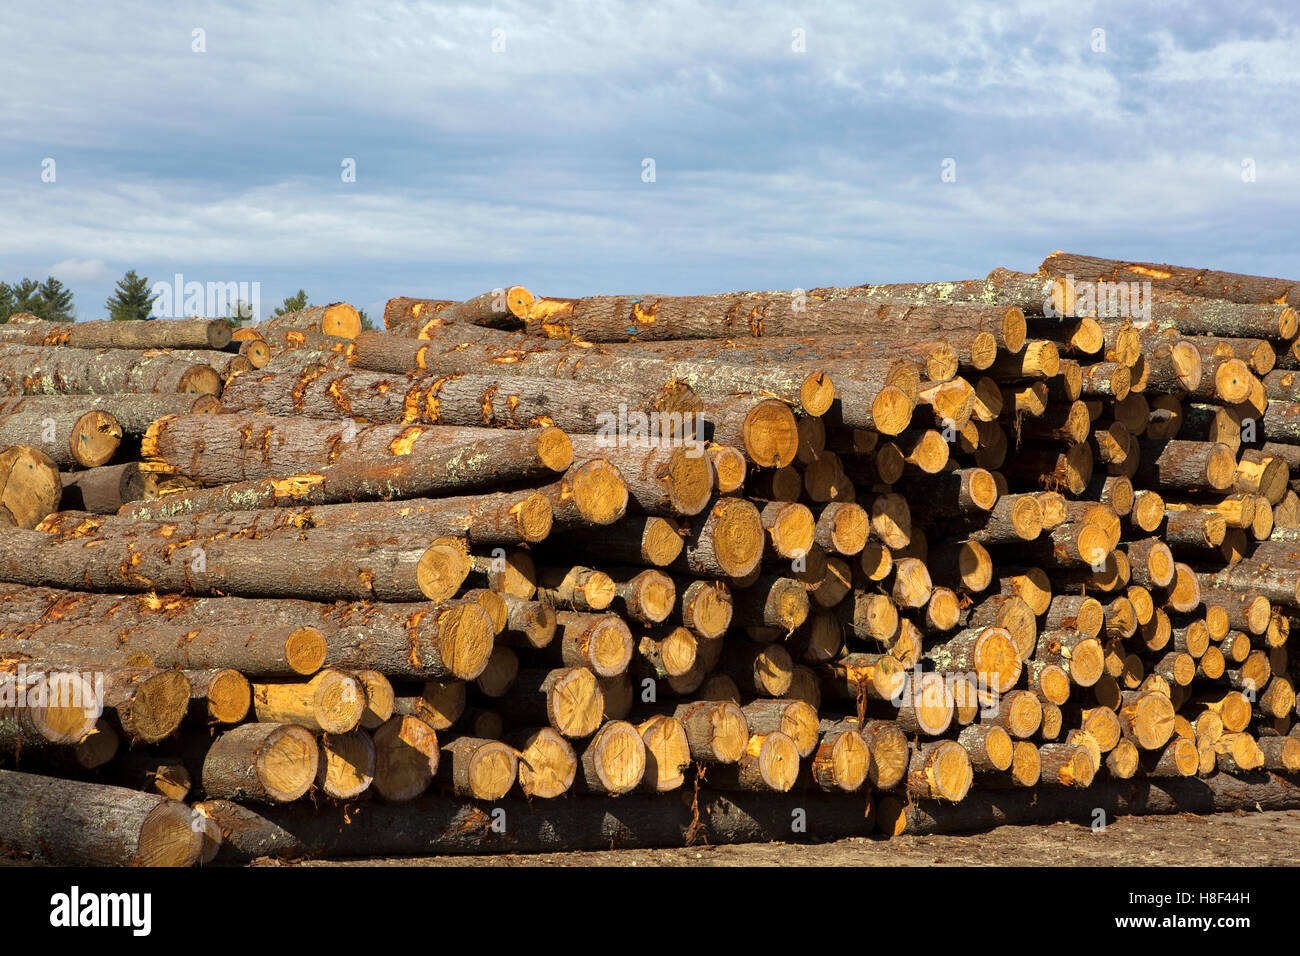 Logs for the timber and forestry industry are stored in stacks. Stock Photo